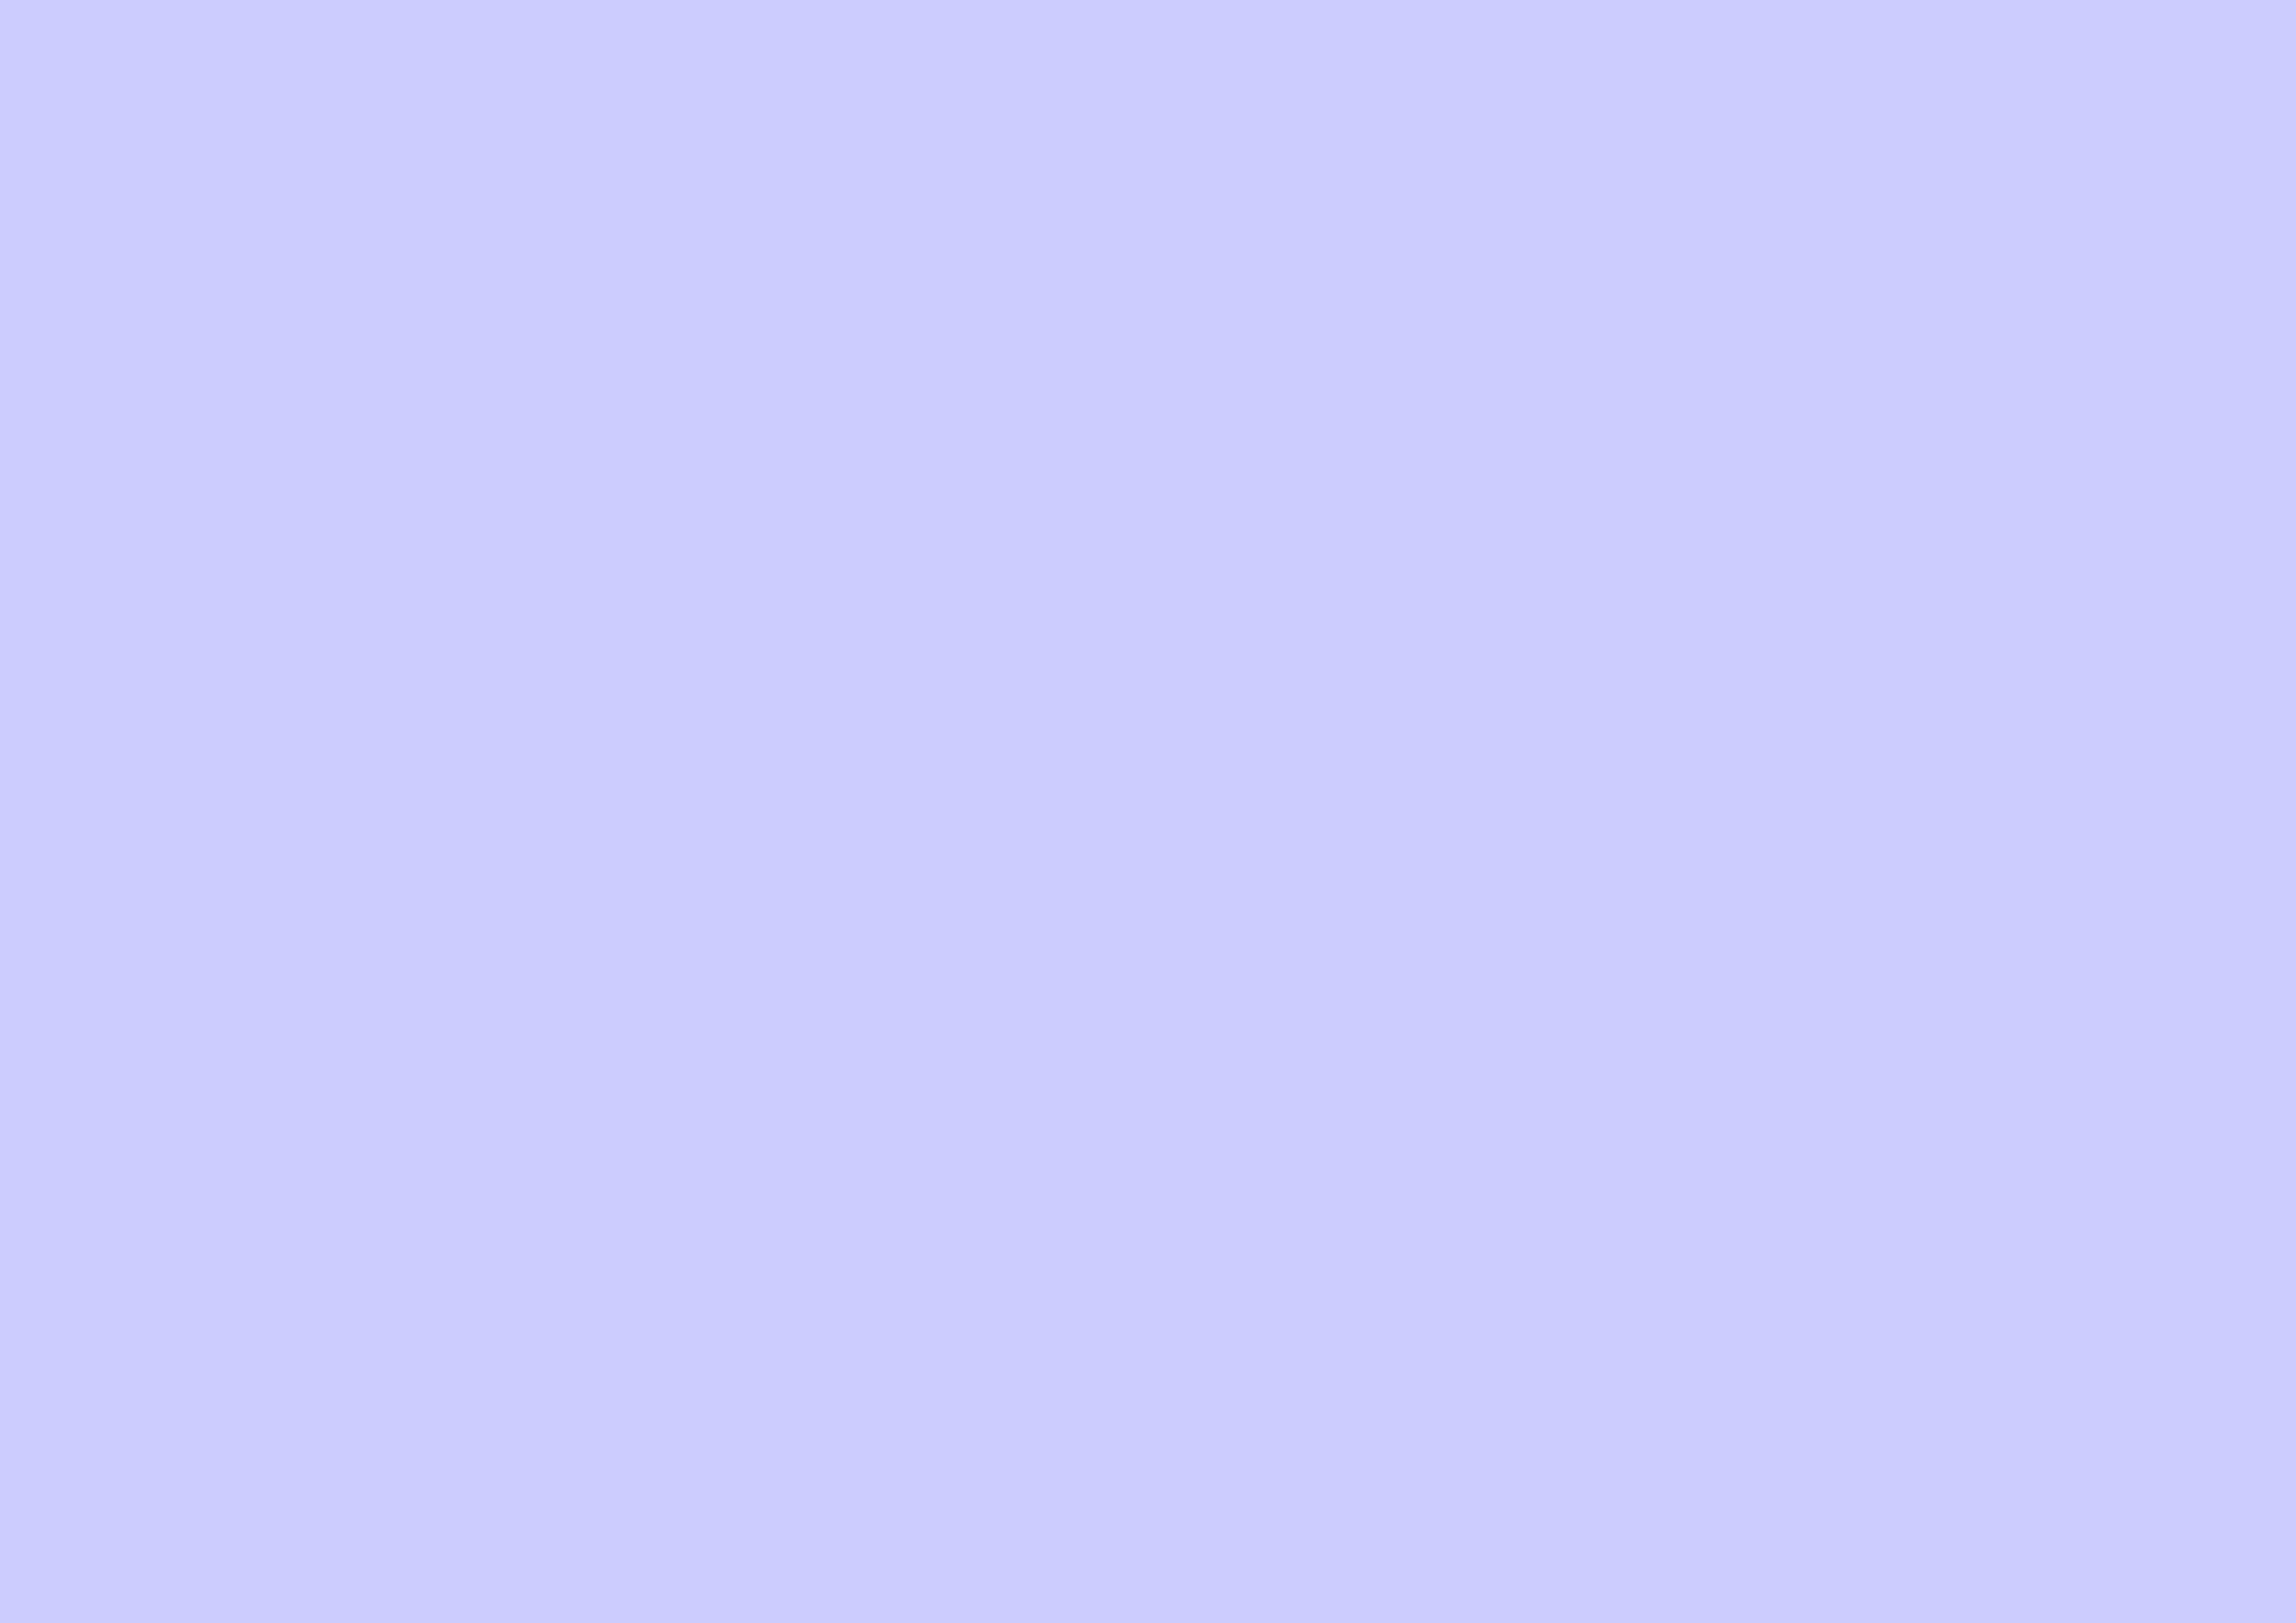 3508x2480 Periwinkle Solid Color Background